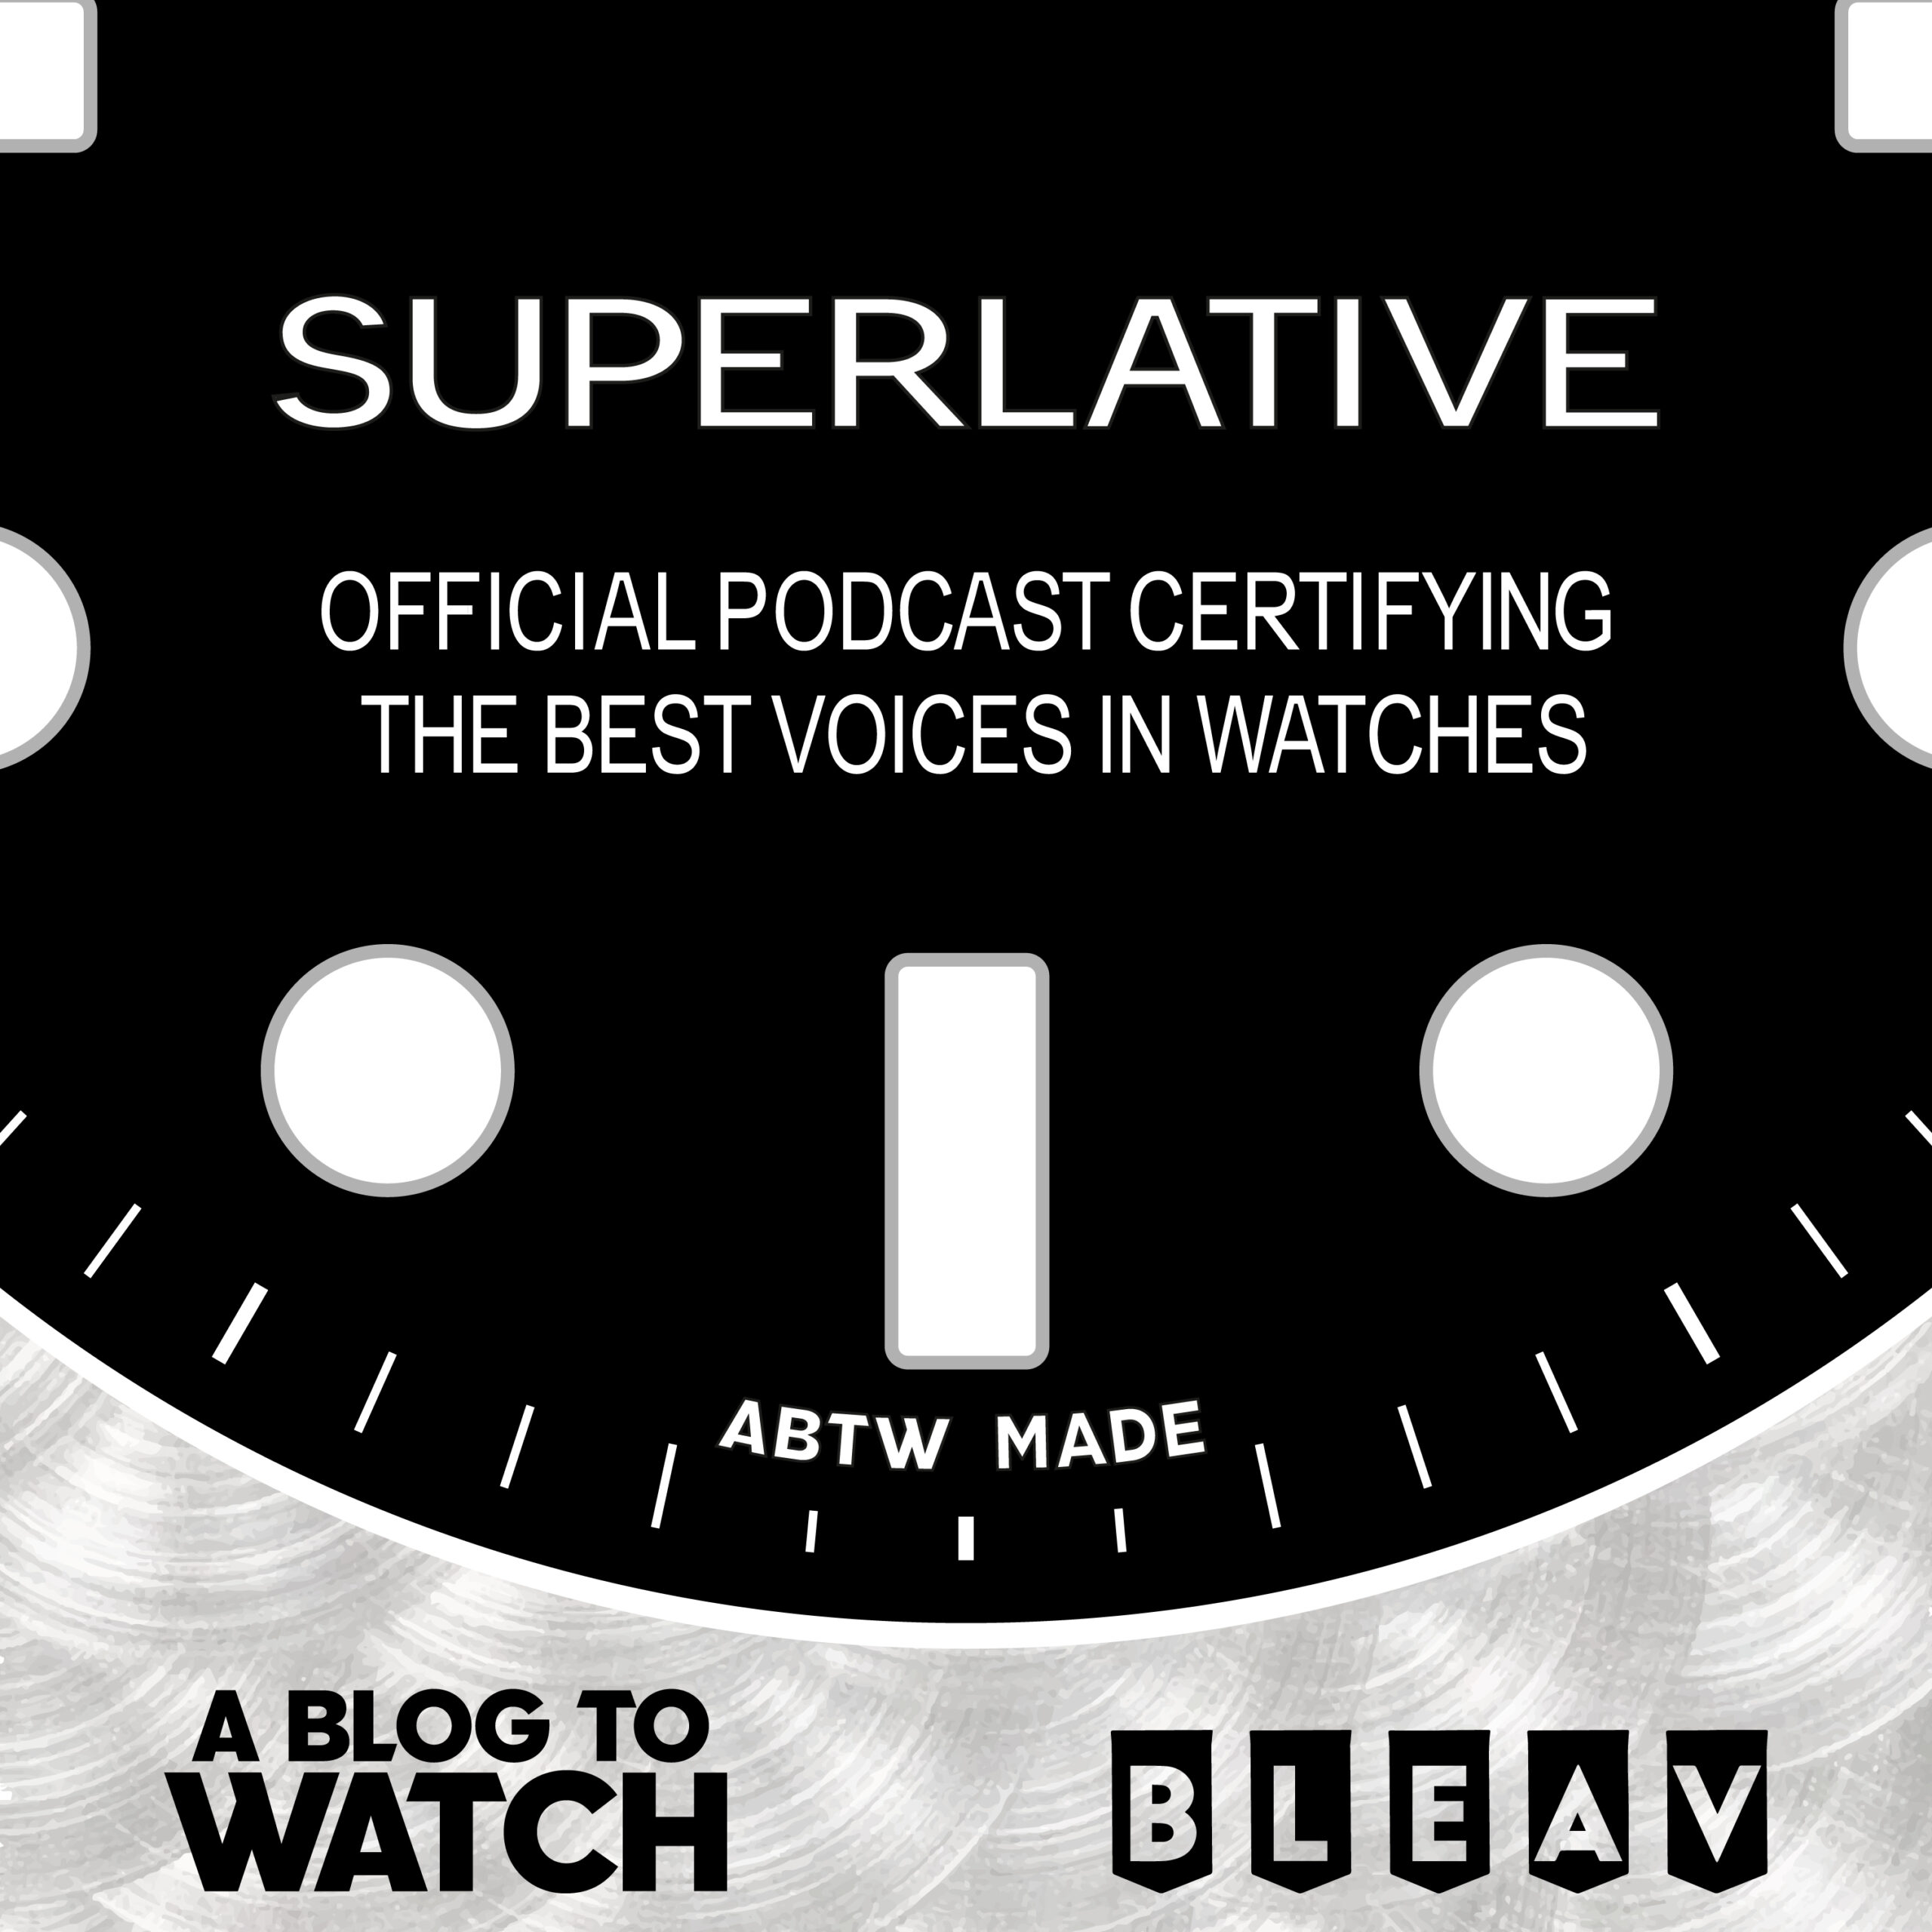 Black Badger, The Next Generation Of Watchmakers, The Art Of Watch Design, & More On The SUPERLATIVE Podcast